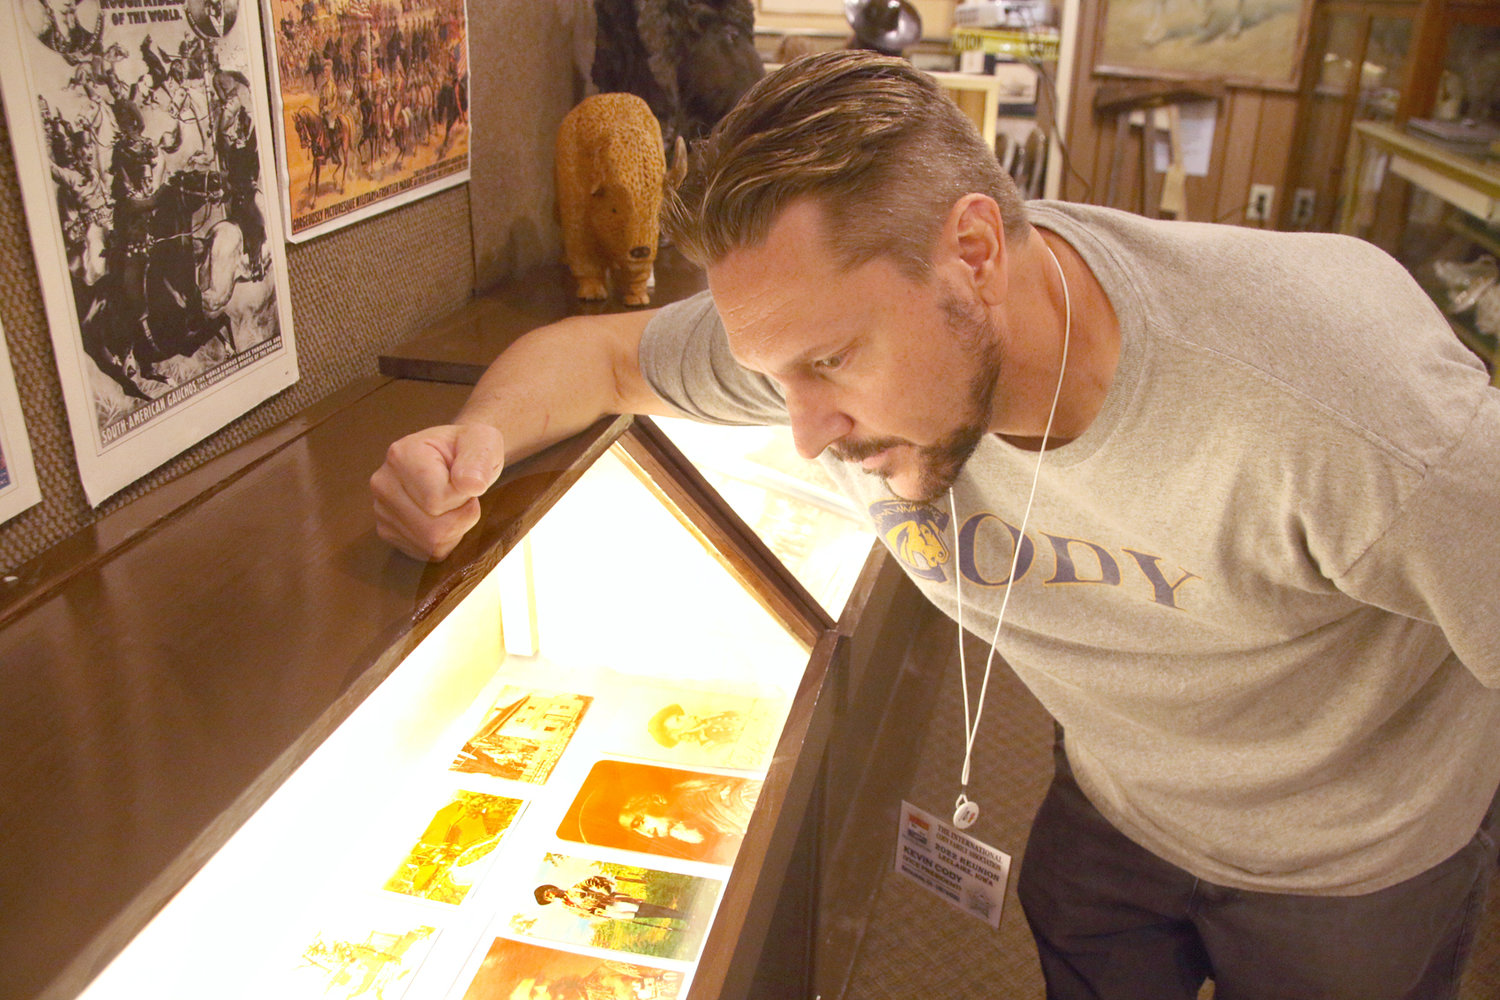 Kevin Cody, originally from Cody, Wyo., examines artifacts at the Buffalo Bill Museum in LeClaire.  The Cody family has over 3,000 pieces of Buffalo Bill memorabilia in their own collection and acquired some more in Iowa.